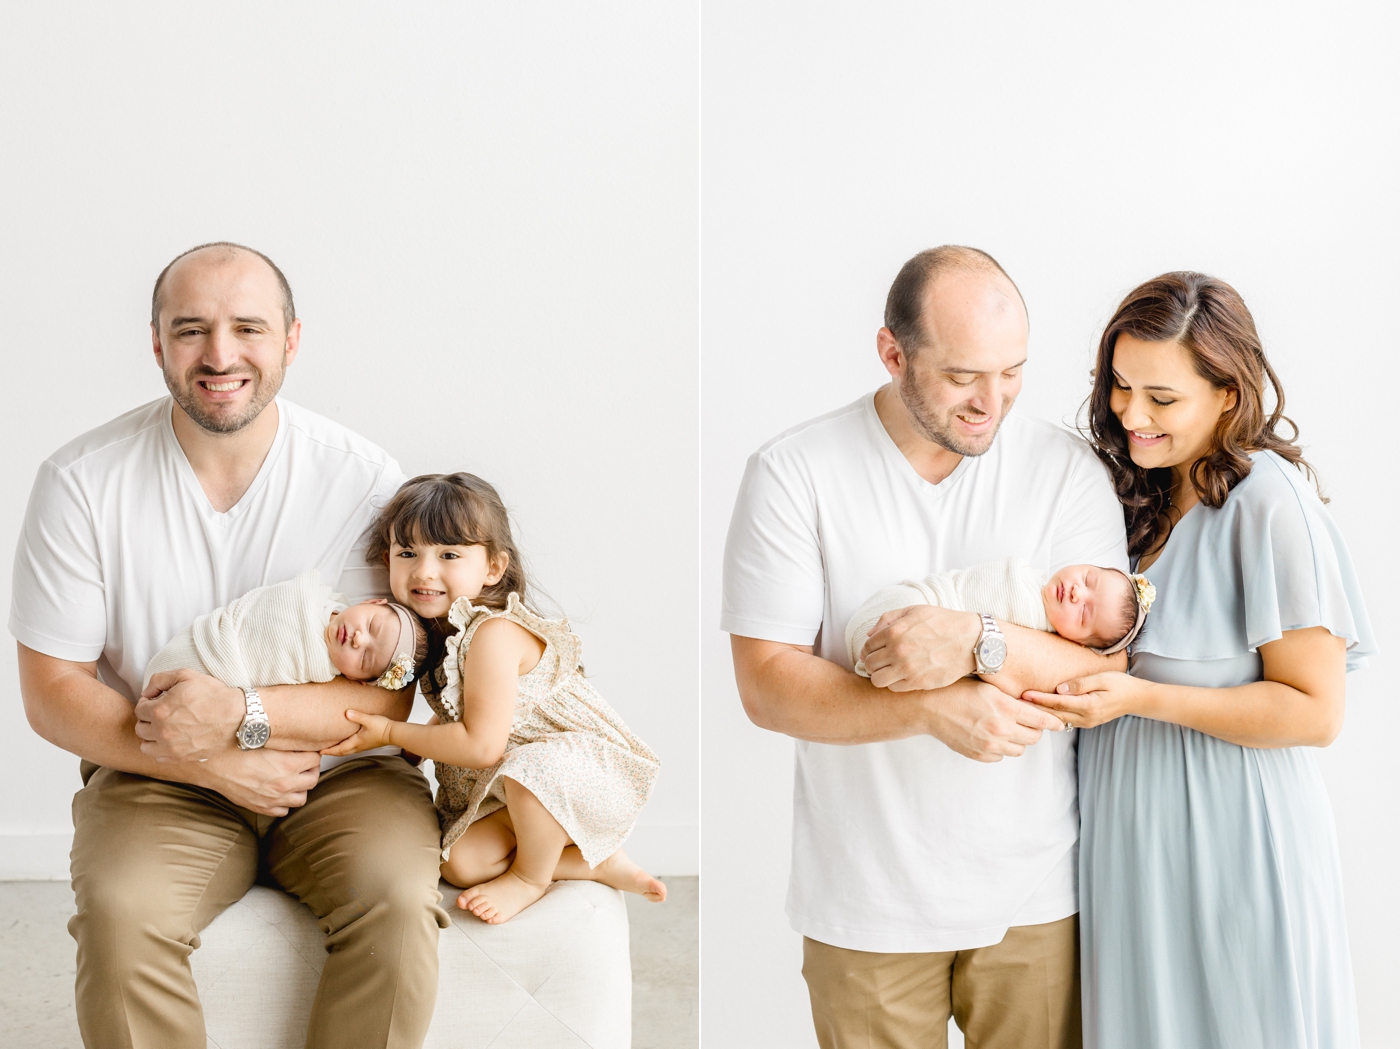 Dad with two daughters smiling at camera. Photos by Sana Ahmed Photography.